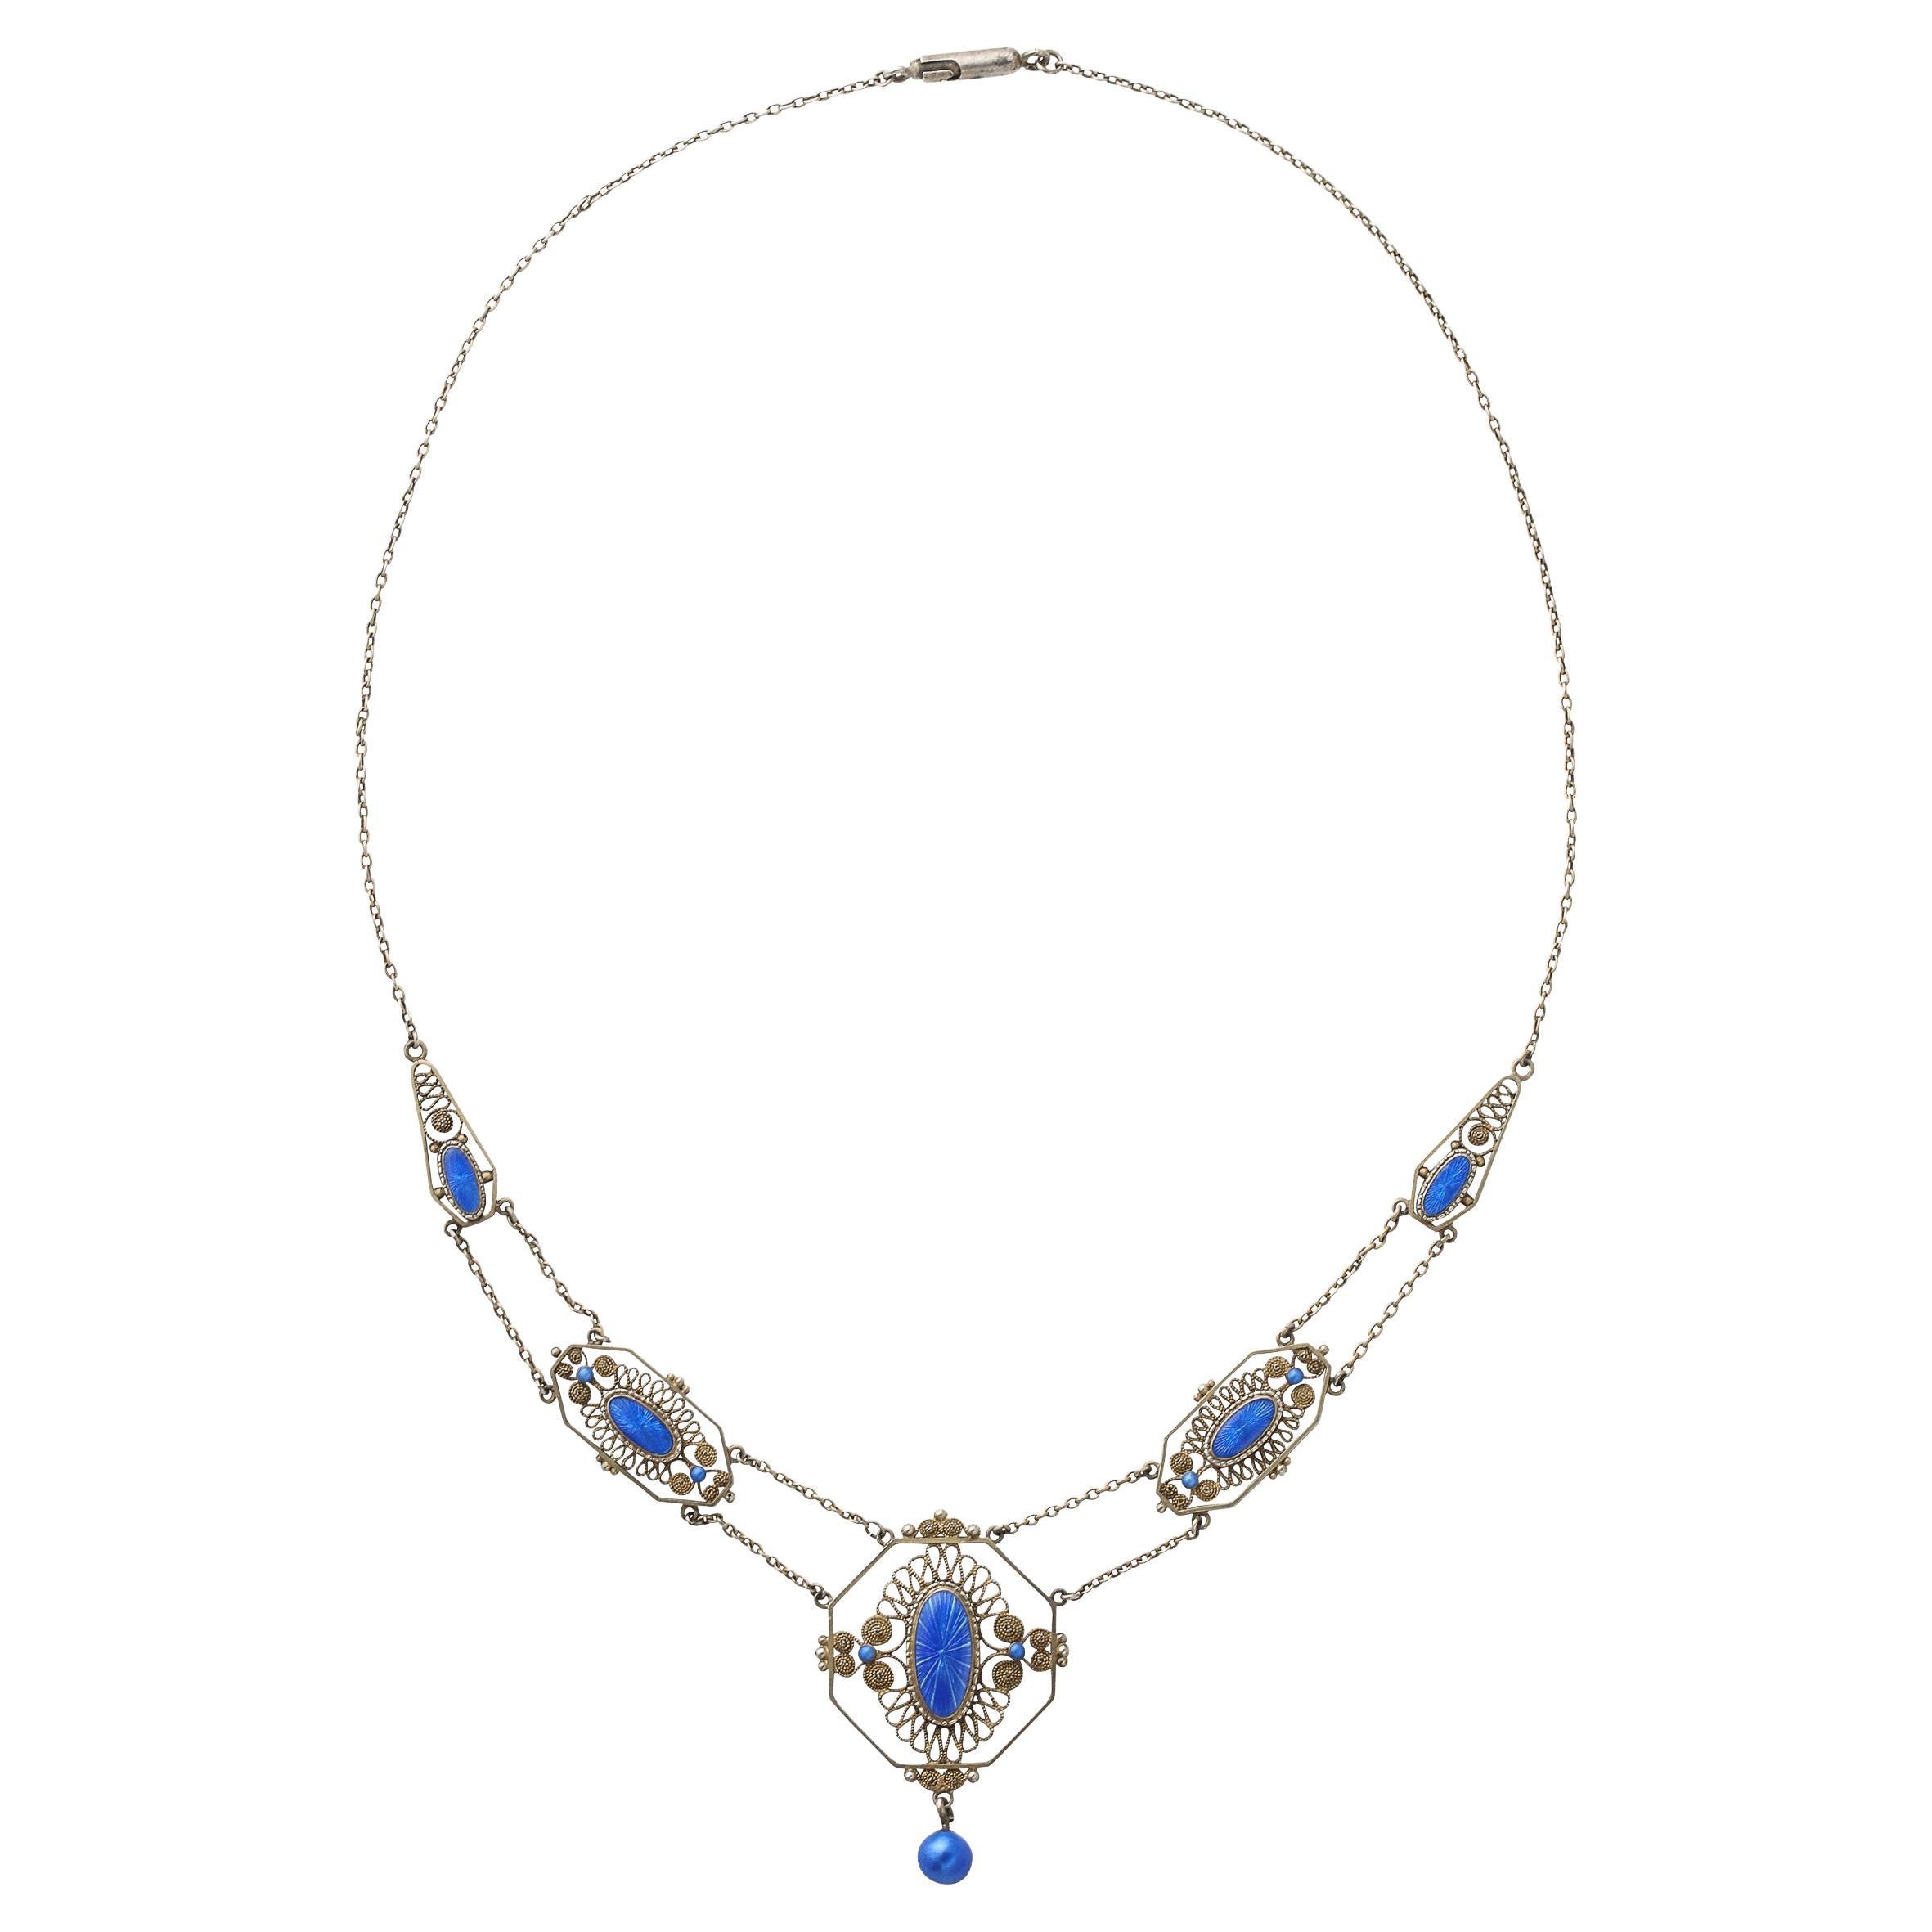 Antique Silver Filigree Swag Style Necklace with Blue Guilloche Enamel Accents